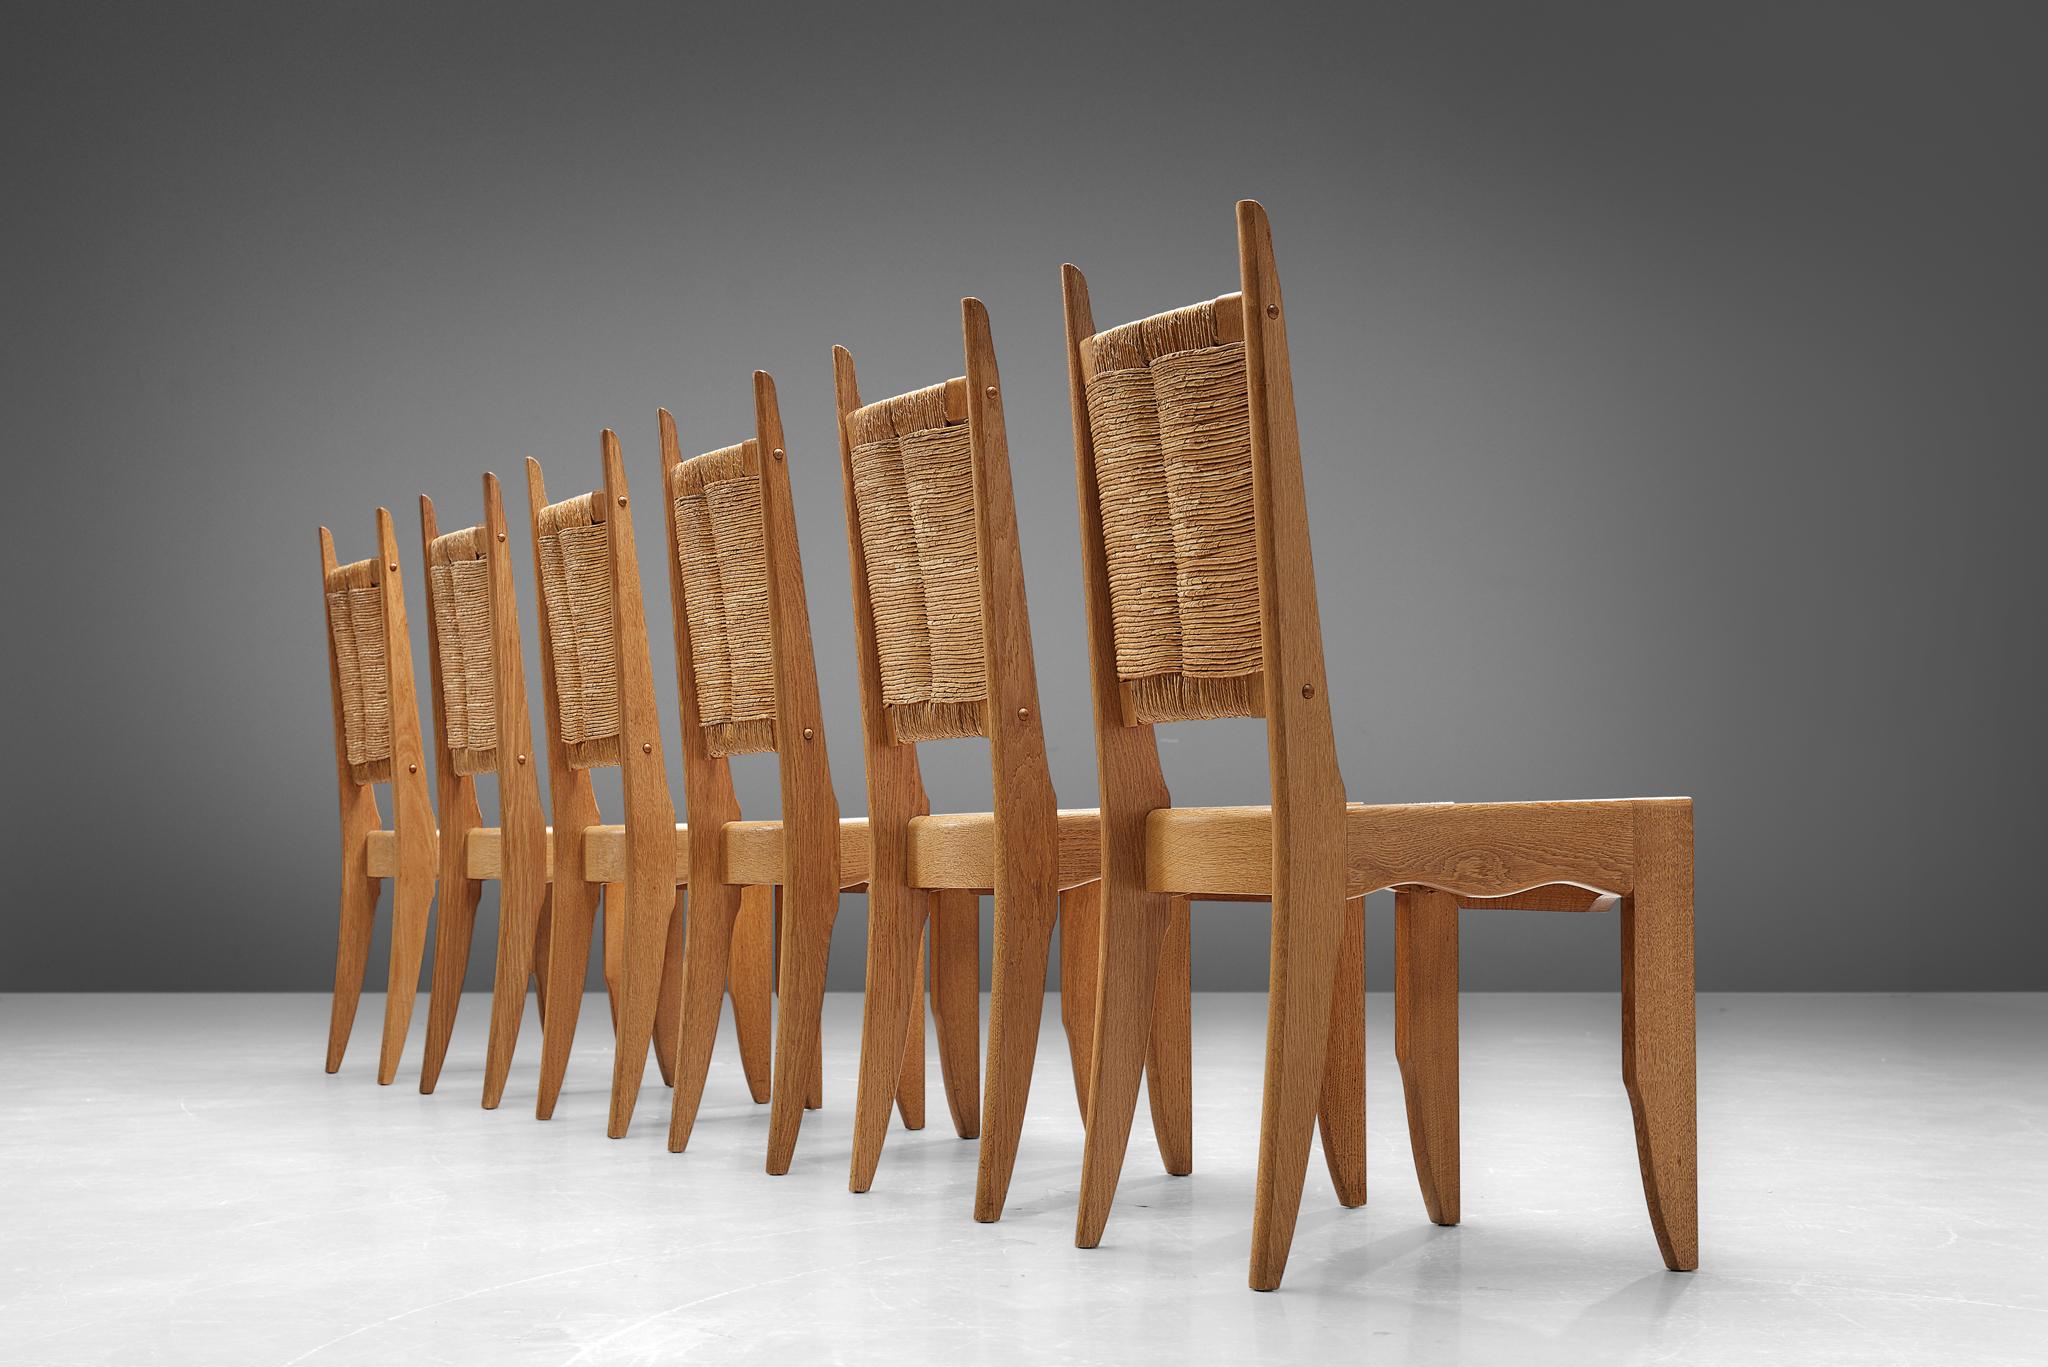 Guillerme & Chambron for Votre Maison, set of 6 dining chairs, solid oak and rush seating, France, 1960s.

Set of six dining chairs in solid oak and rush by Guillerme and Chambron. These chairs show the characteristic frame of this French designer